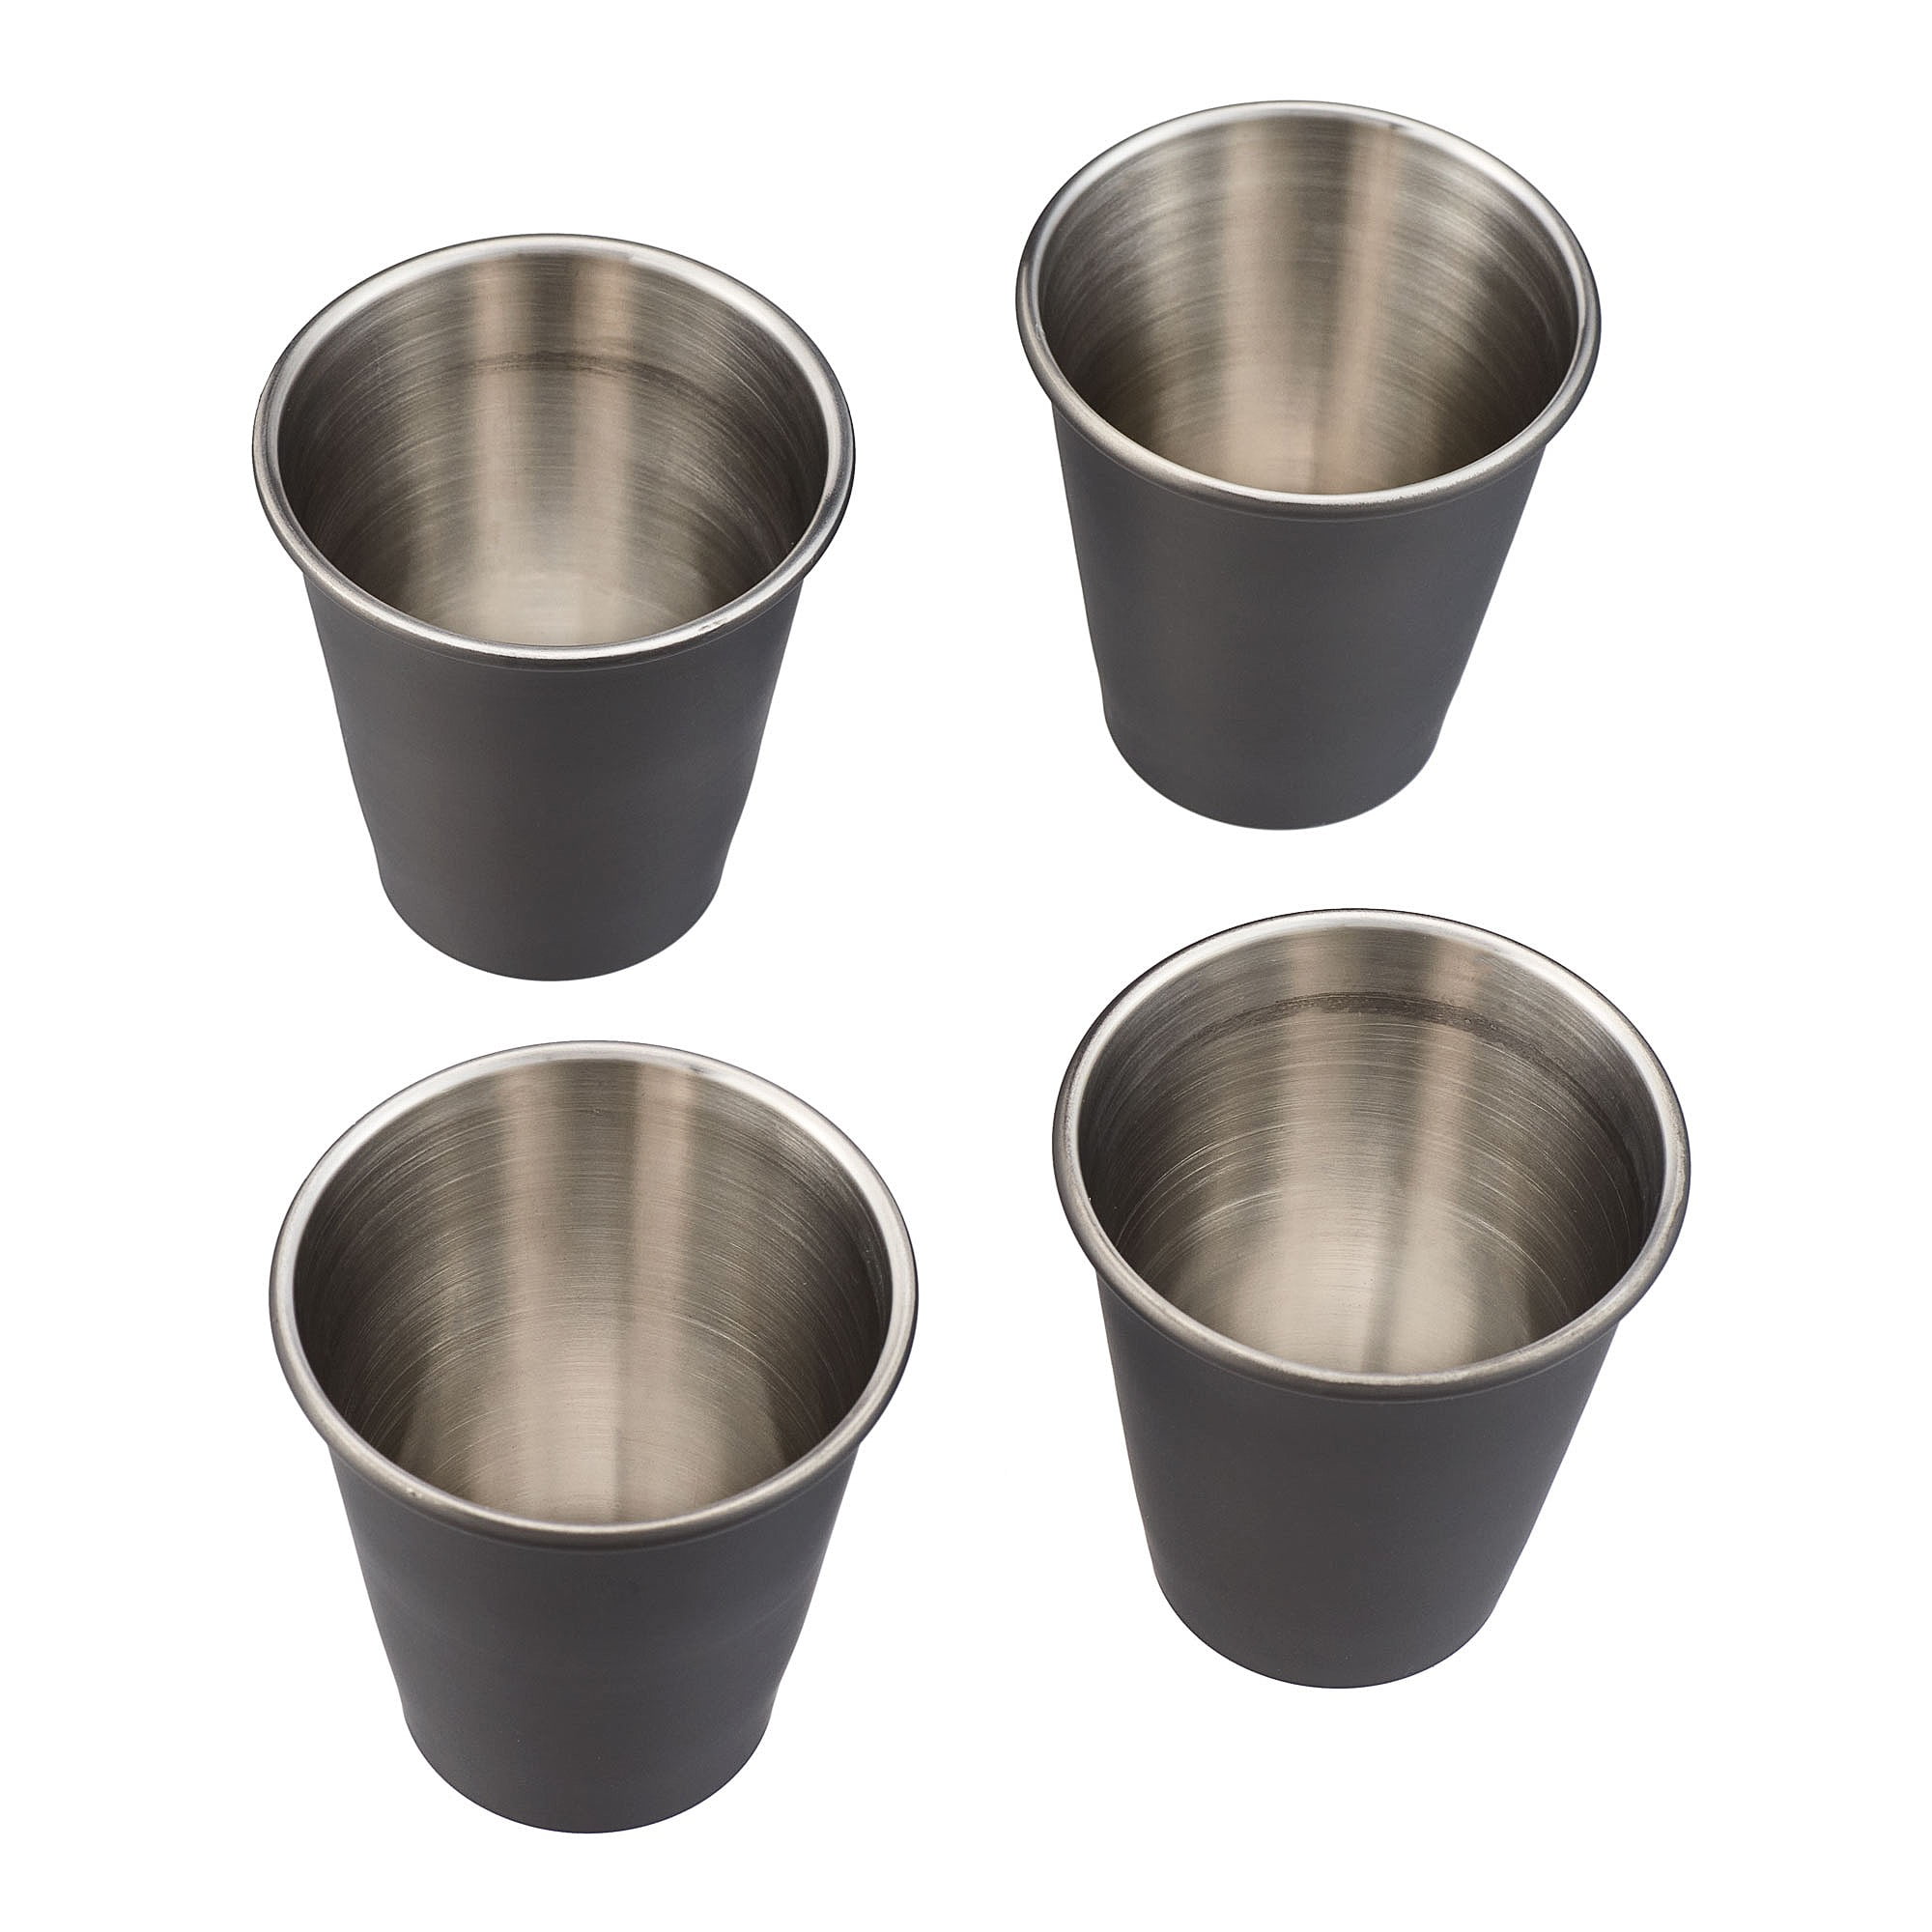 100 Pcs Stainless Steel Shot Glasses Stainless Steel Shot Cups, 1 Ounce  Unbreakable Metal Shot Glass…See more 100 Pcs Stainless Steel Shot Glasses